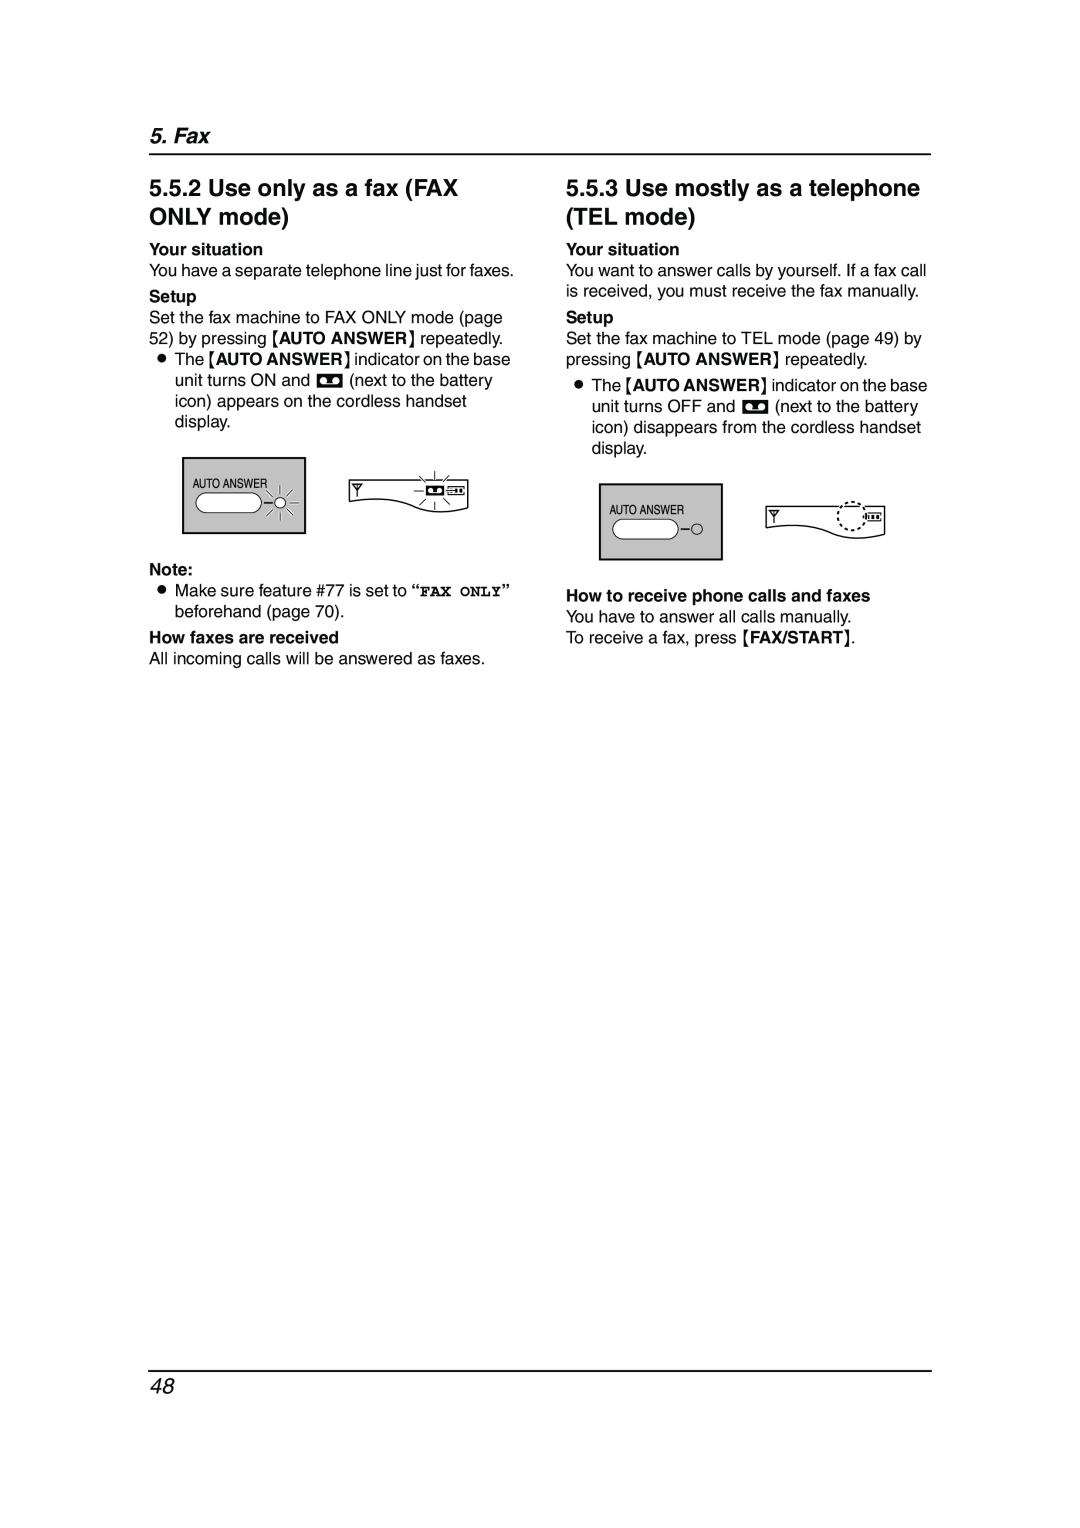 Panasonic KX-FC241AL Use only as a fax FAX ONLY mode, Use mostly as a telephone TEL mode, How faxes are received, Fax 